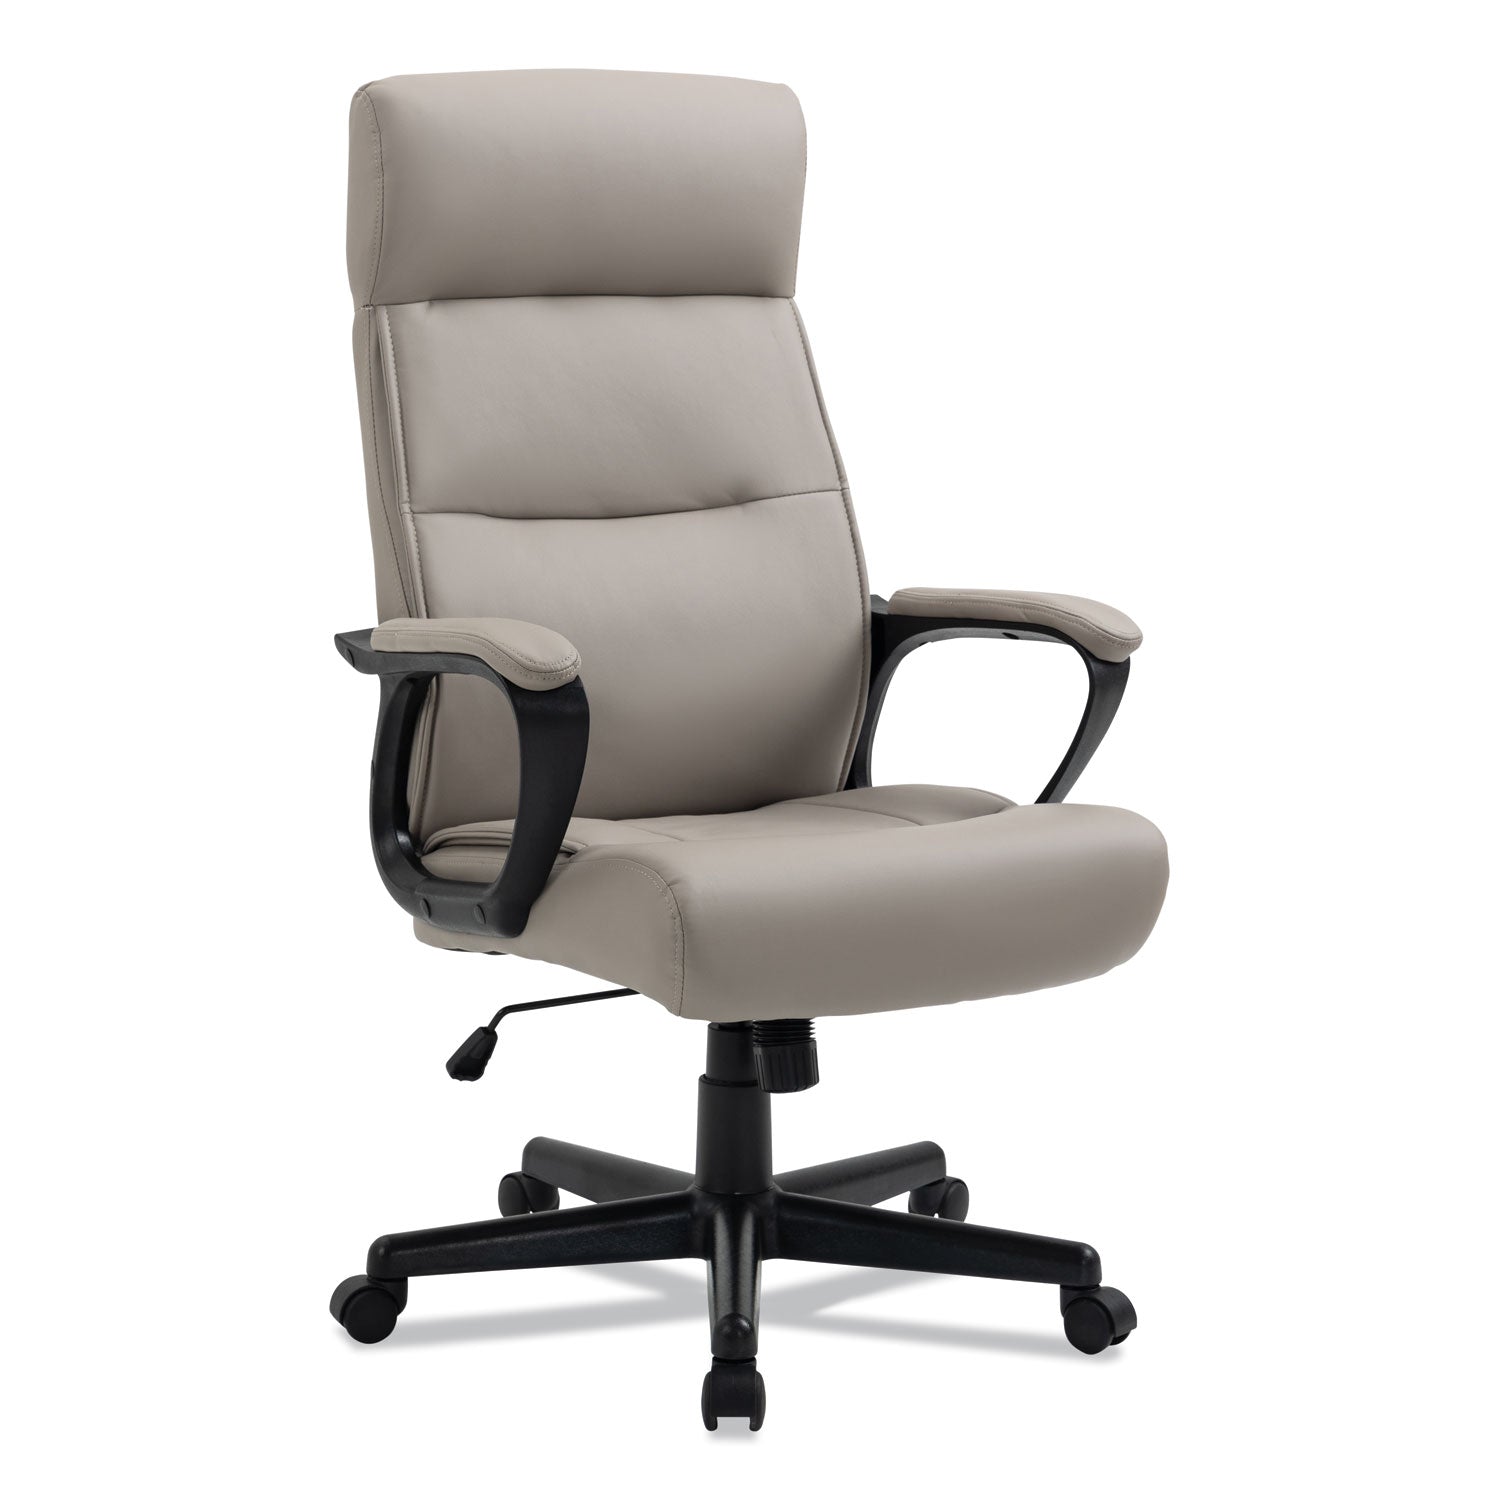 alera-oxnam-series-high-back-task-chair-supports-up-to-275-lbs-1756-to-2138-seat-height-tan-seat-back-black-base_aleon41b59 - 1